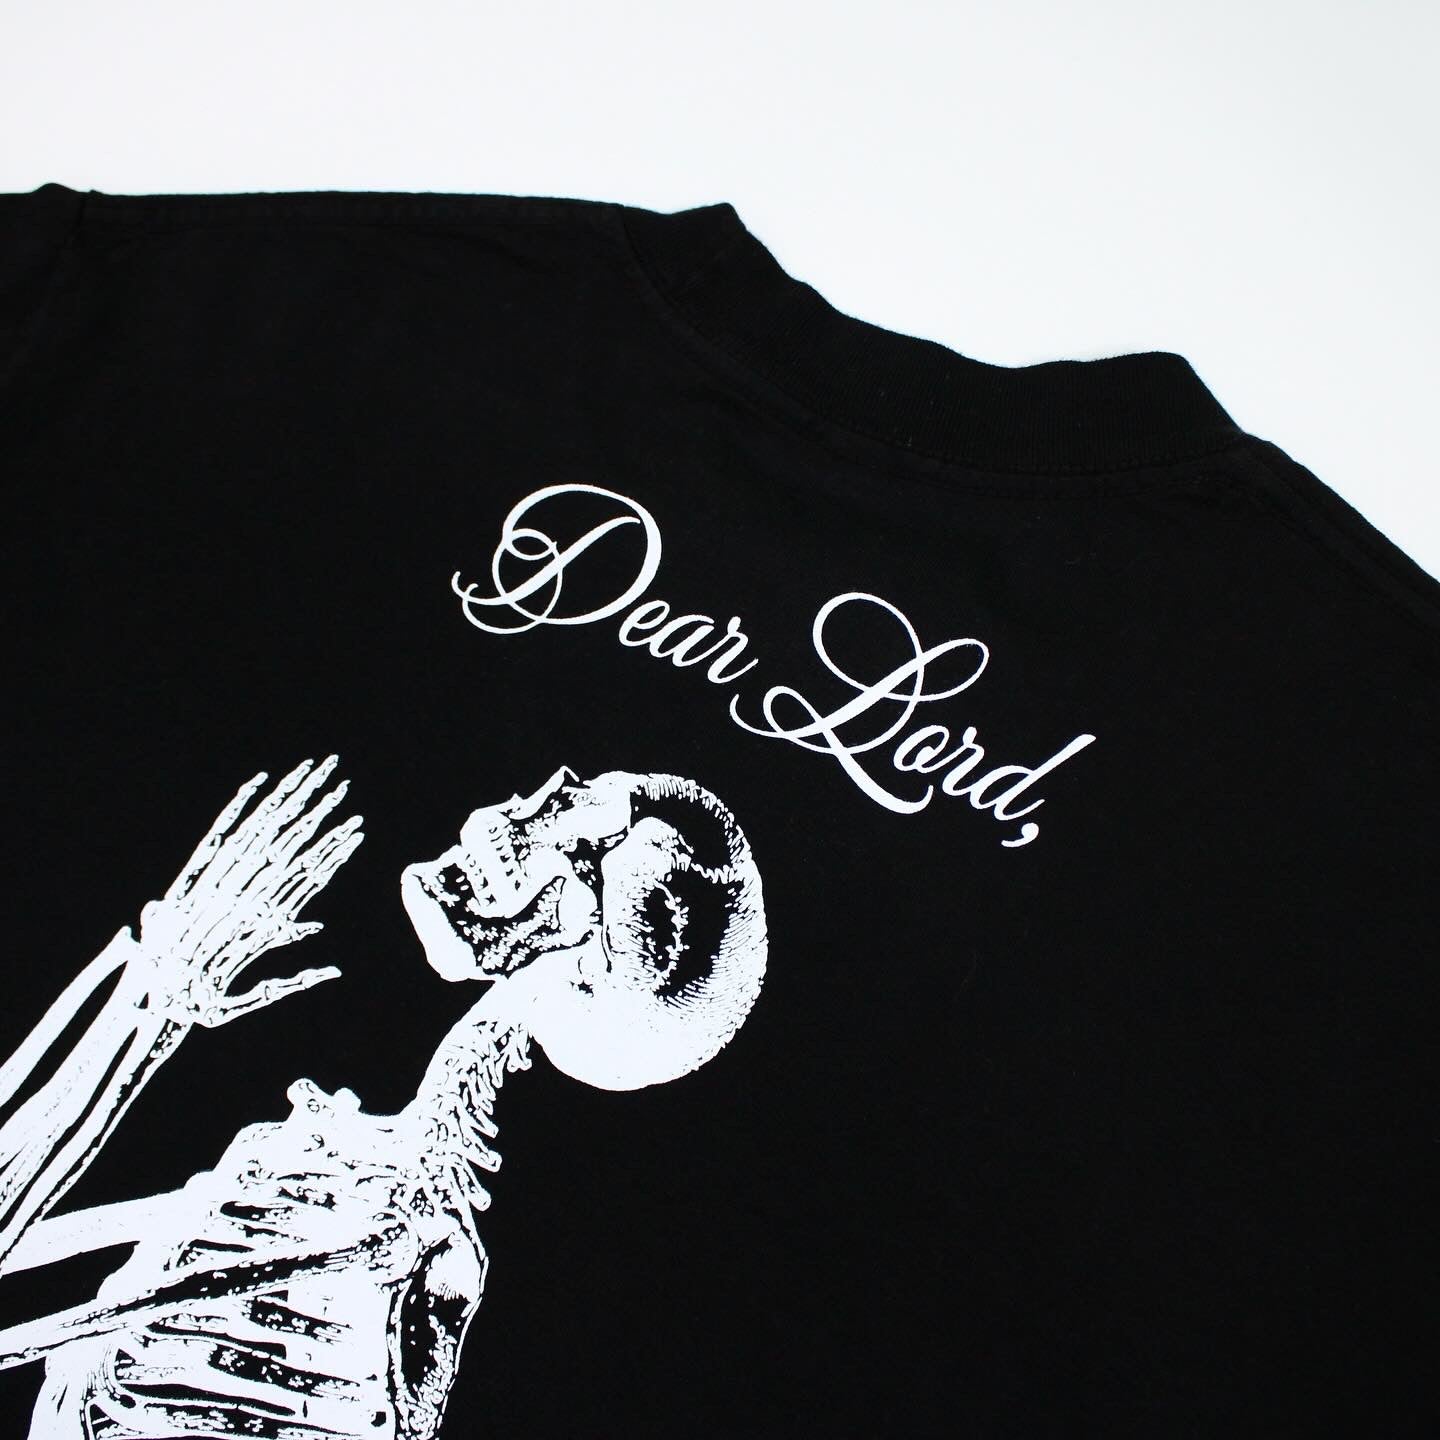 Pain Is Pure 'Pure' Praying Skeleton L/S Tee Black/Whtie